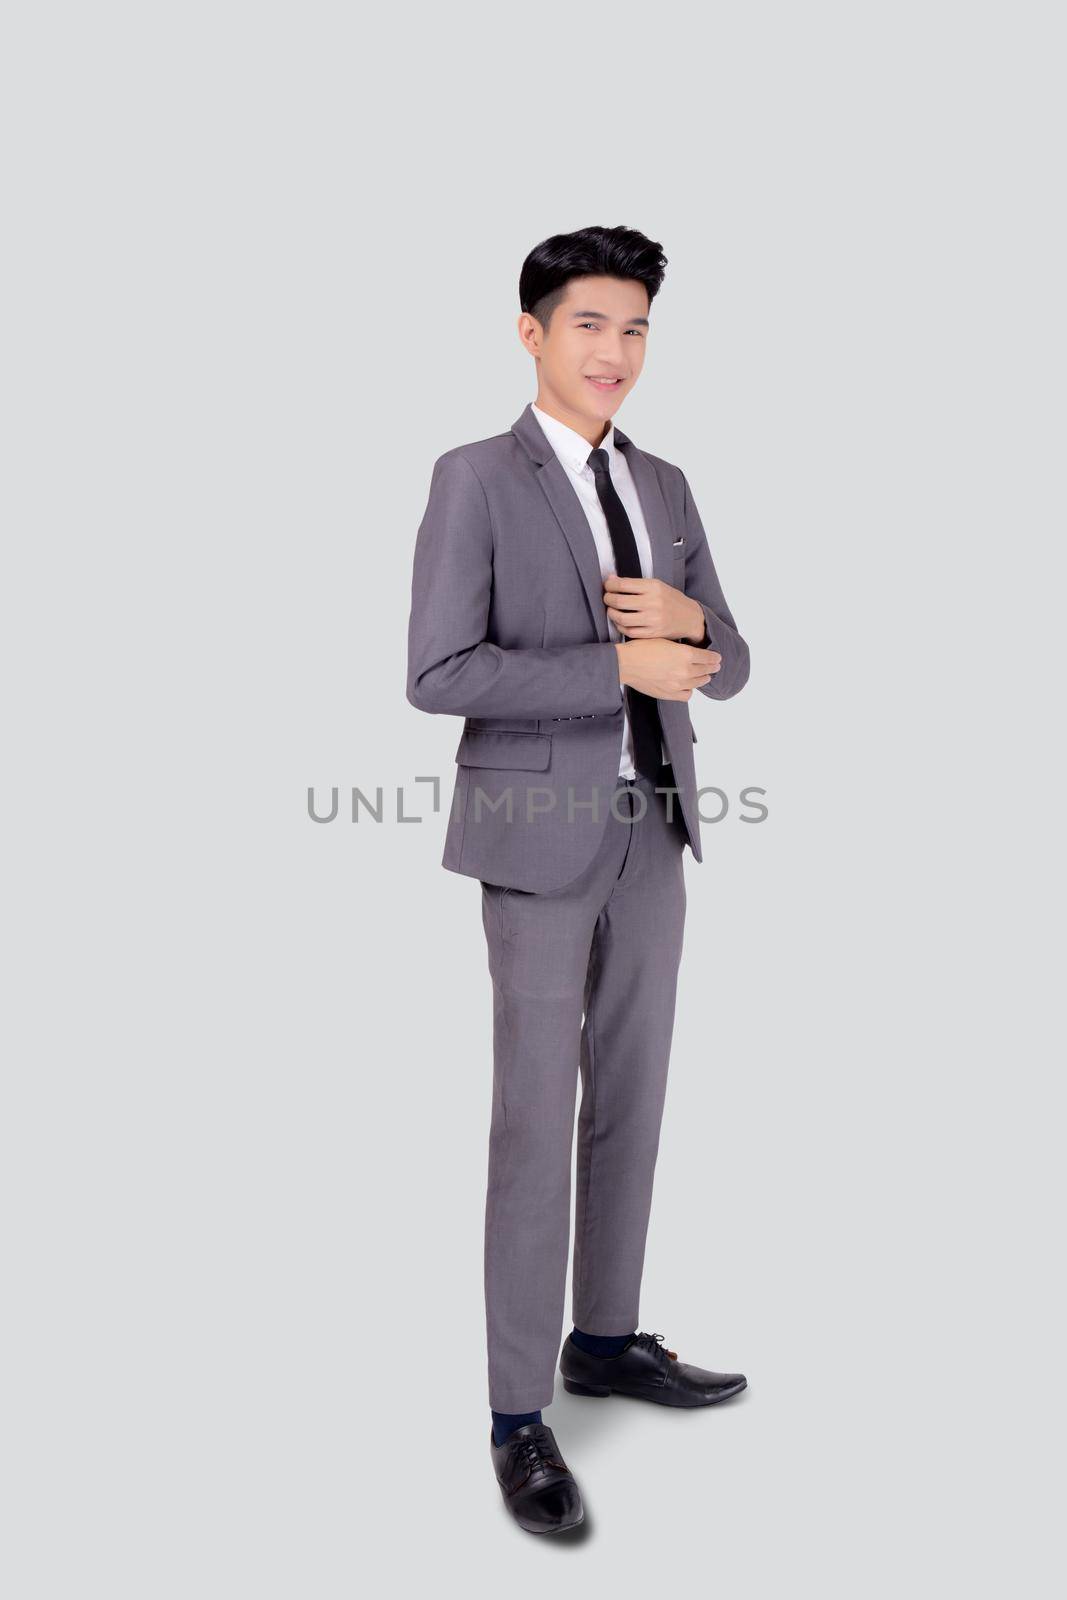 Portrait young asian businessman in suit smiling with confident and friendly isolated on white background, business man smart with success, manager or executive with handsome and leadership.